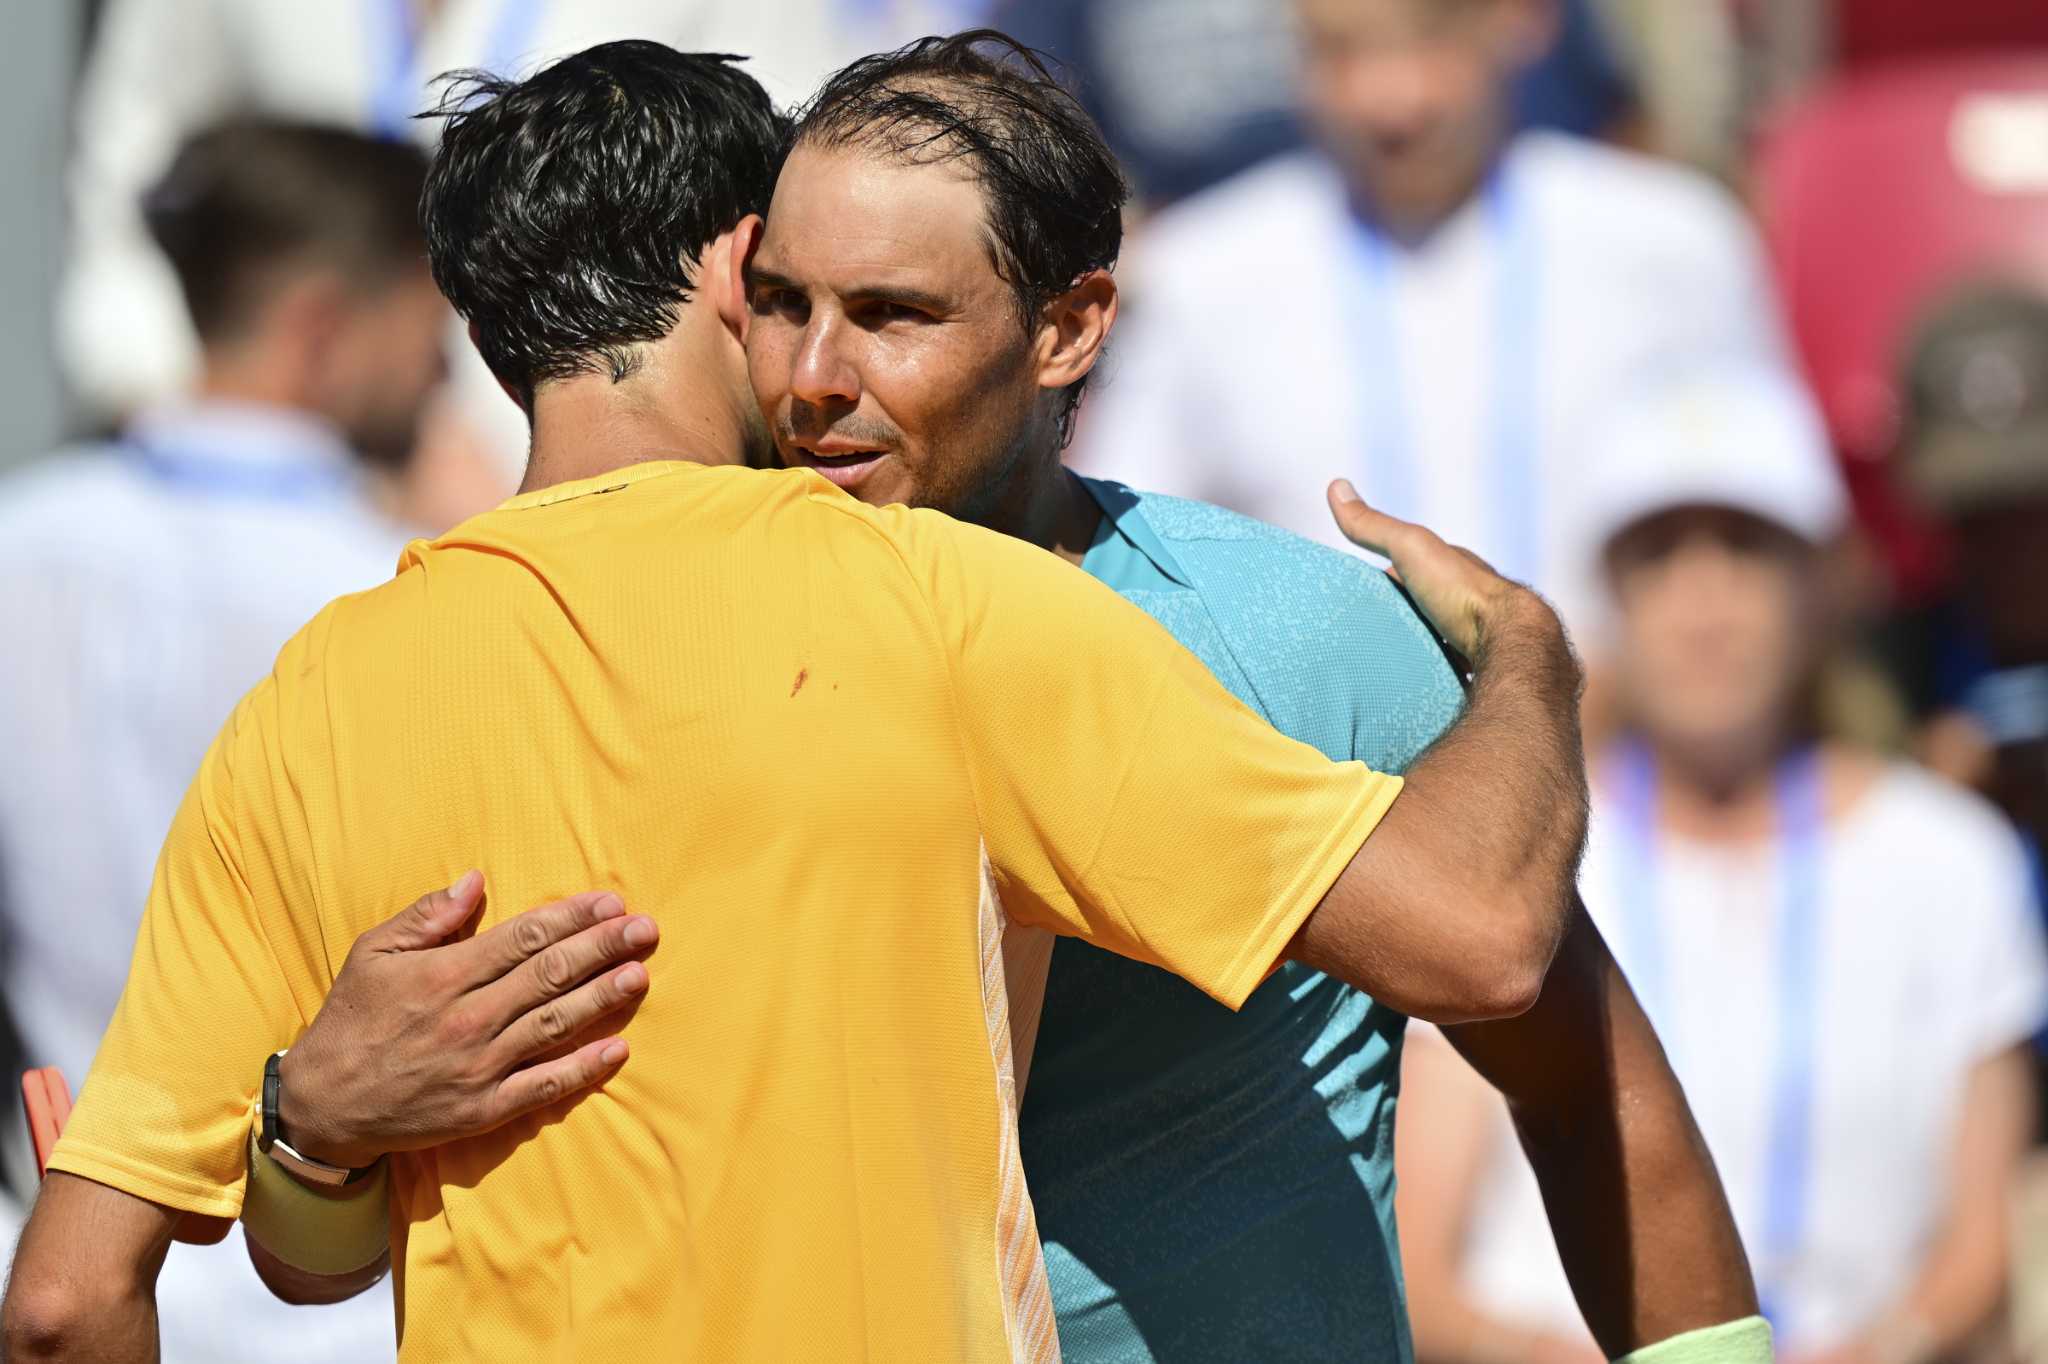 Nadal falls to Nuno Borges in Nordea Open final, his first since 2022 French Open